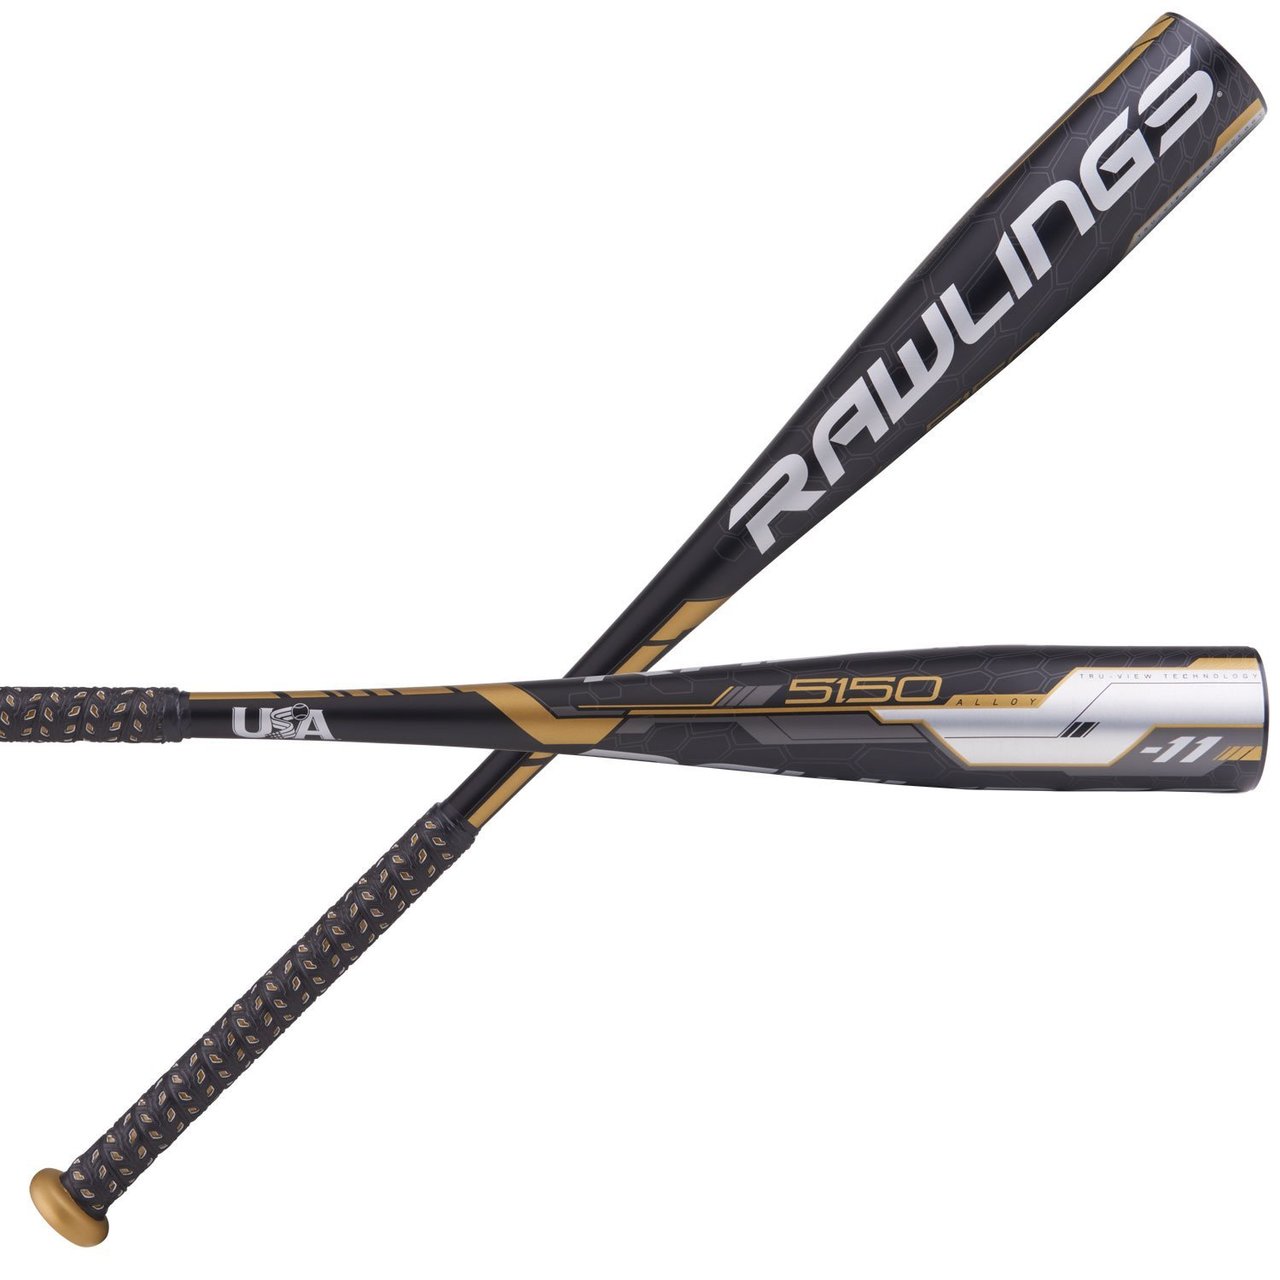 rawlings-2018-usa-baseball-bat-5150-11-28-in-17-oz US8511-2817 Rawlings  083321414602 High-performance metal Baseball bat delivers exceptional pop and balance Engineered with